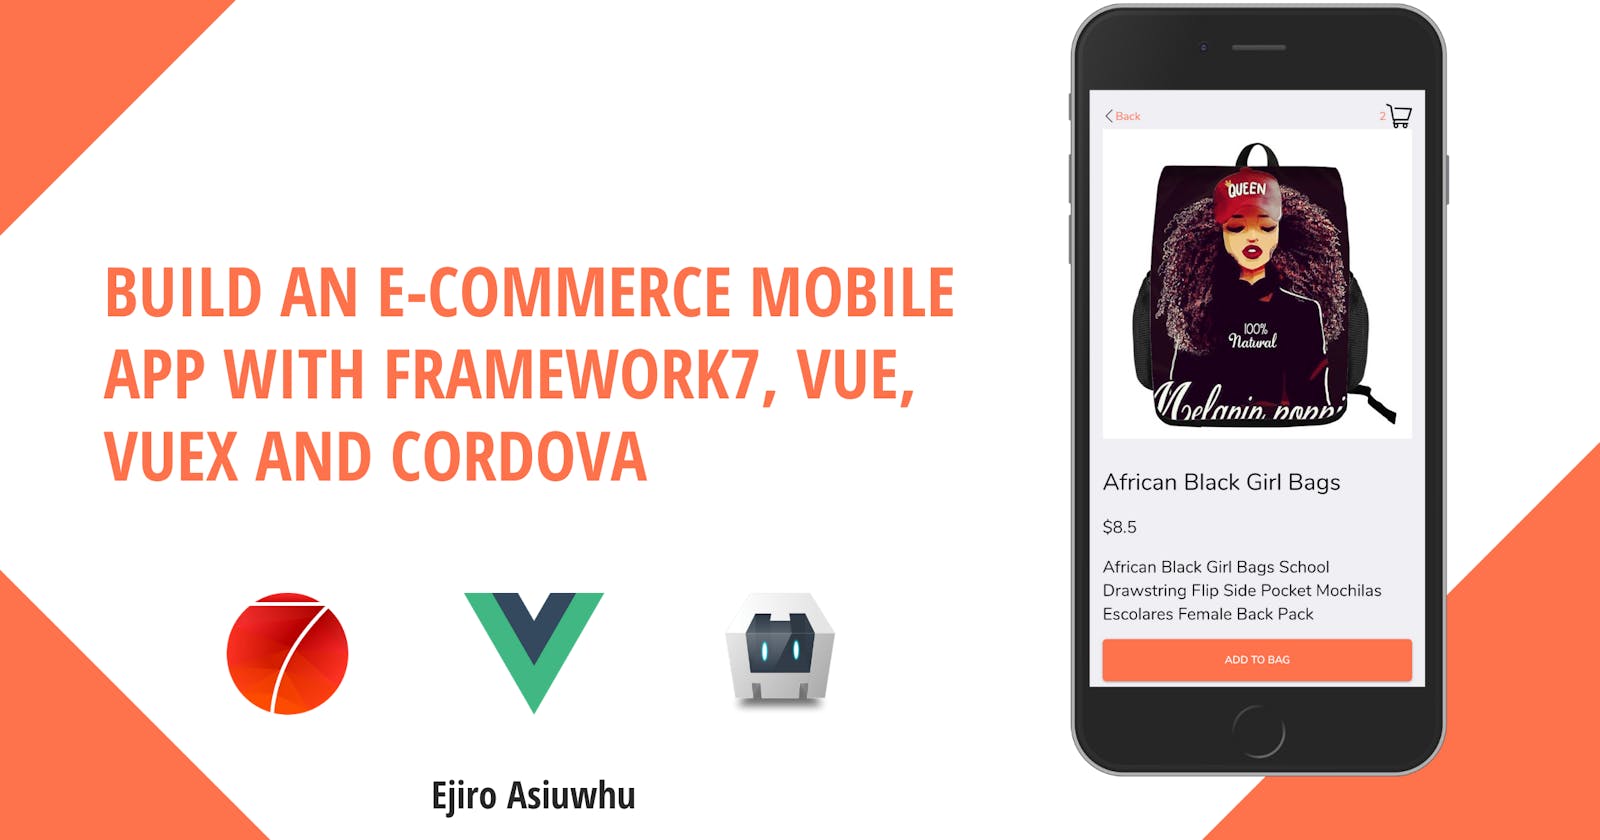 Build an e-commerce Mobile App with Framework7, Vue, Vuex, and Cordova